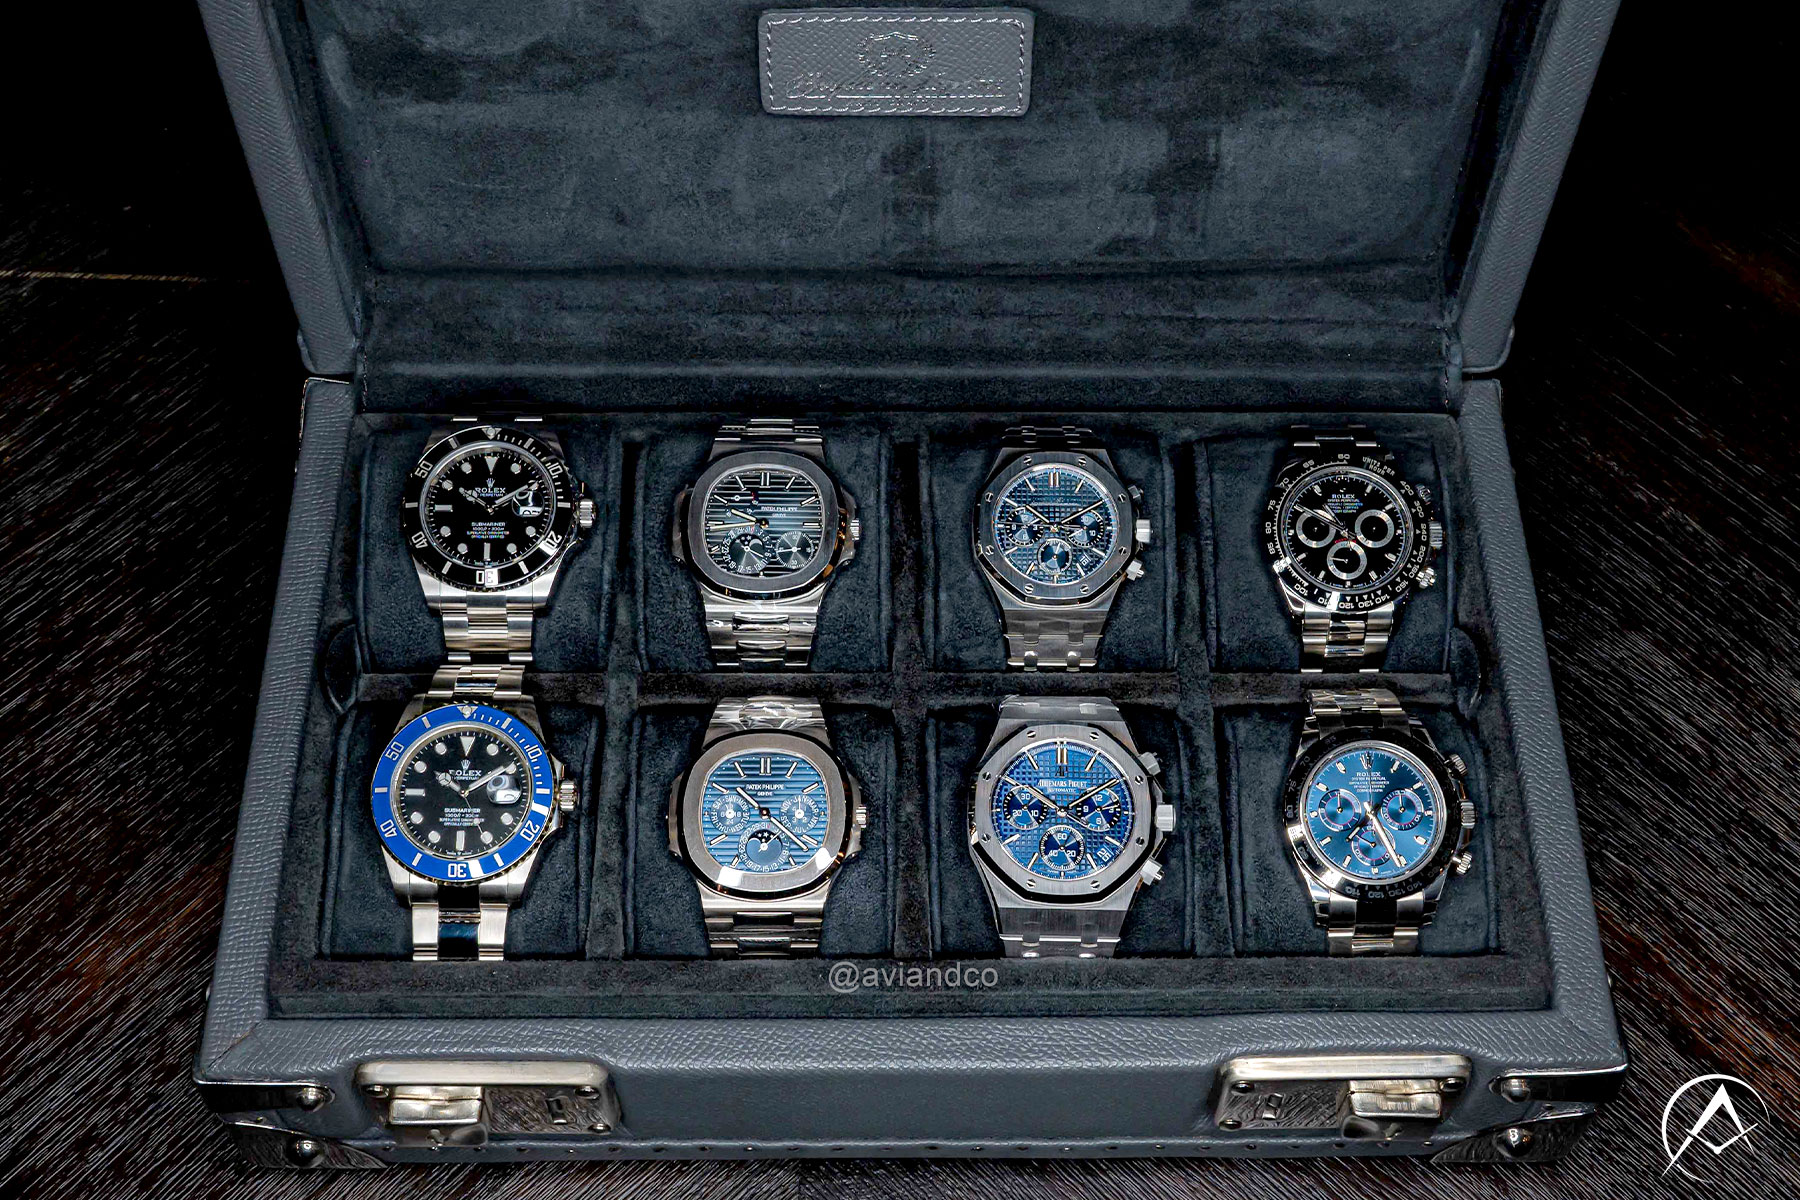 Navy Blue Avi & Co. Watch Case Featuring Four Stainless Steel Luxury Timepieces on the Top Row and Four White Gold Luxury Timepieces on the Bottom Row. They are a Mixture of Rolex, Audemars Piguet, and Patek Philippe watches.